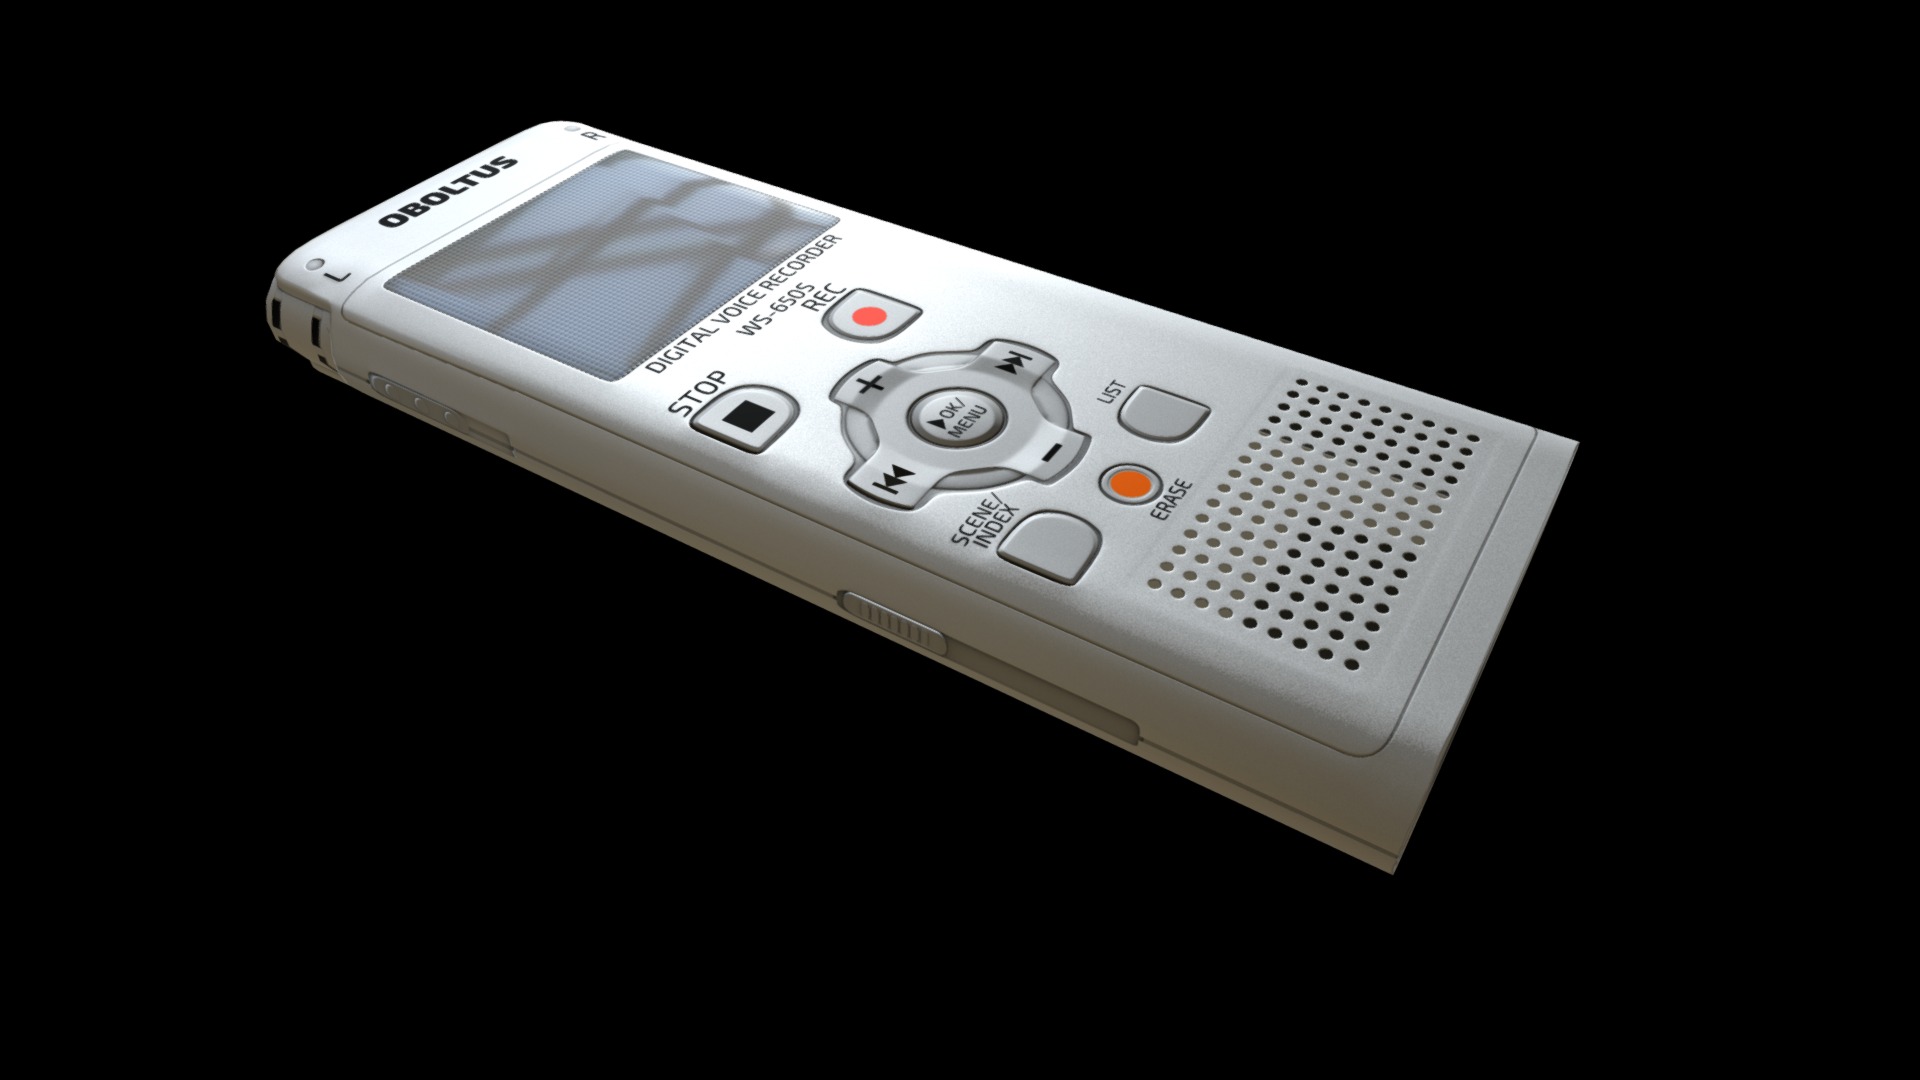 3D model Digital Voice Recorder - This is a 3D model of the Digital Voice Recorder. The 3D model is about a white rectangular device.